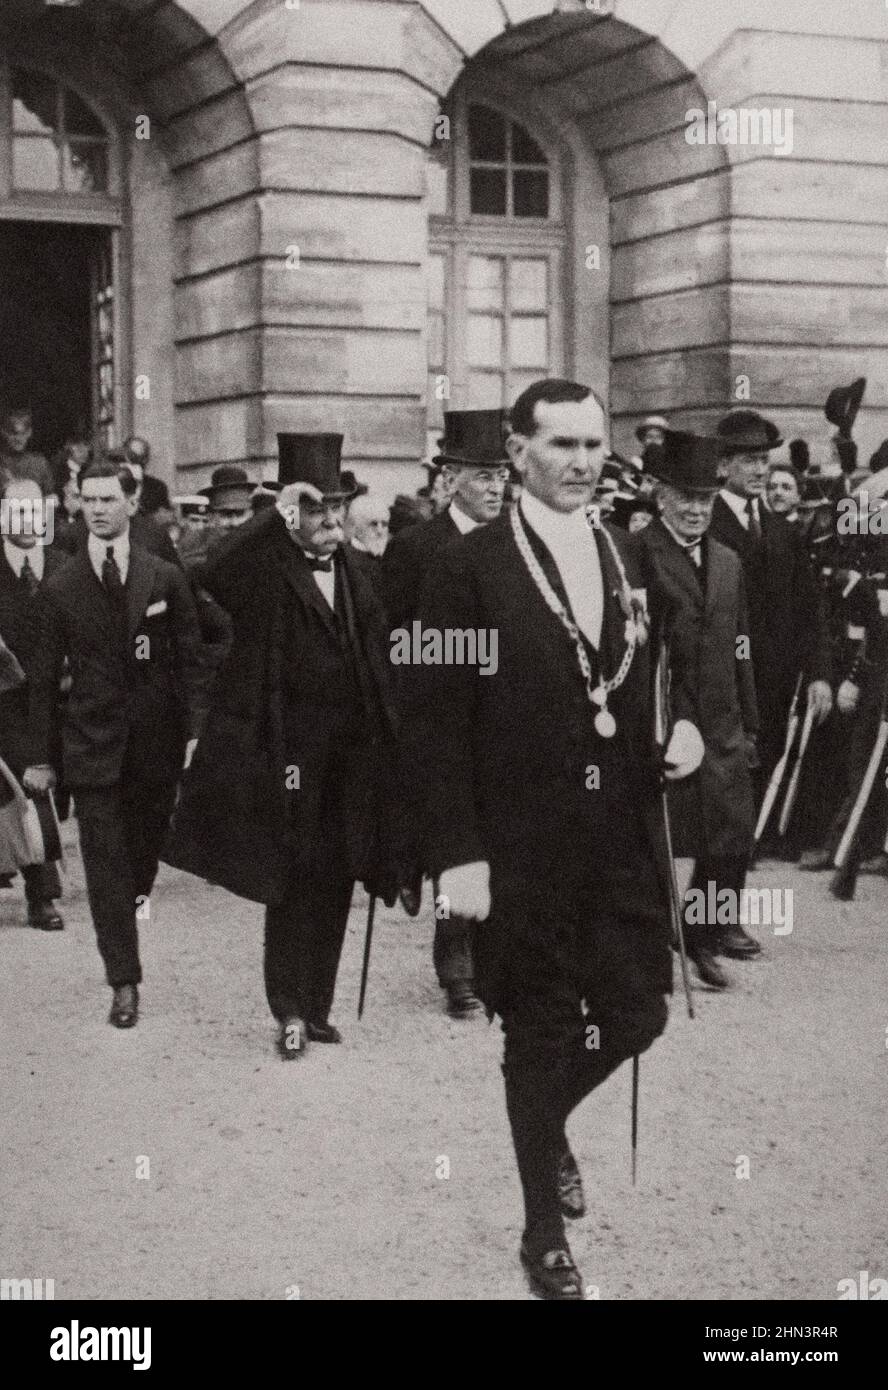 M. Clemenceau, Woodrow Wilson and Lloyd George leaving the Saint-Germain Chateau after presenting the Peace terms to the Austrians. Saint-Germain, Fra Stock Photo